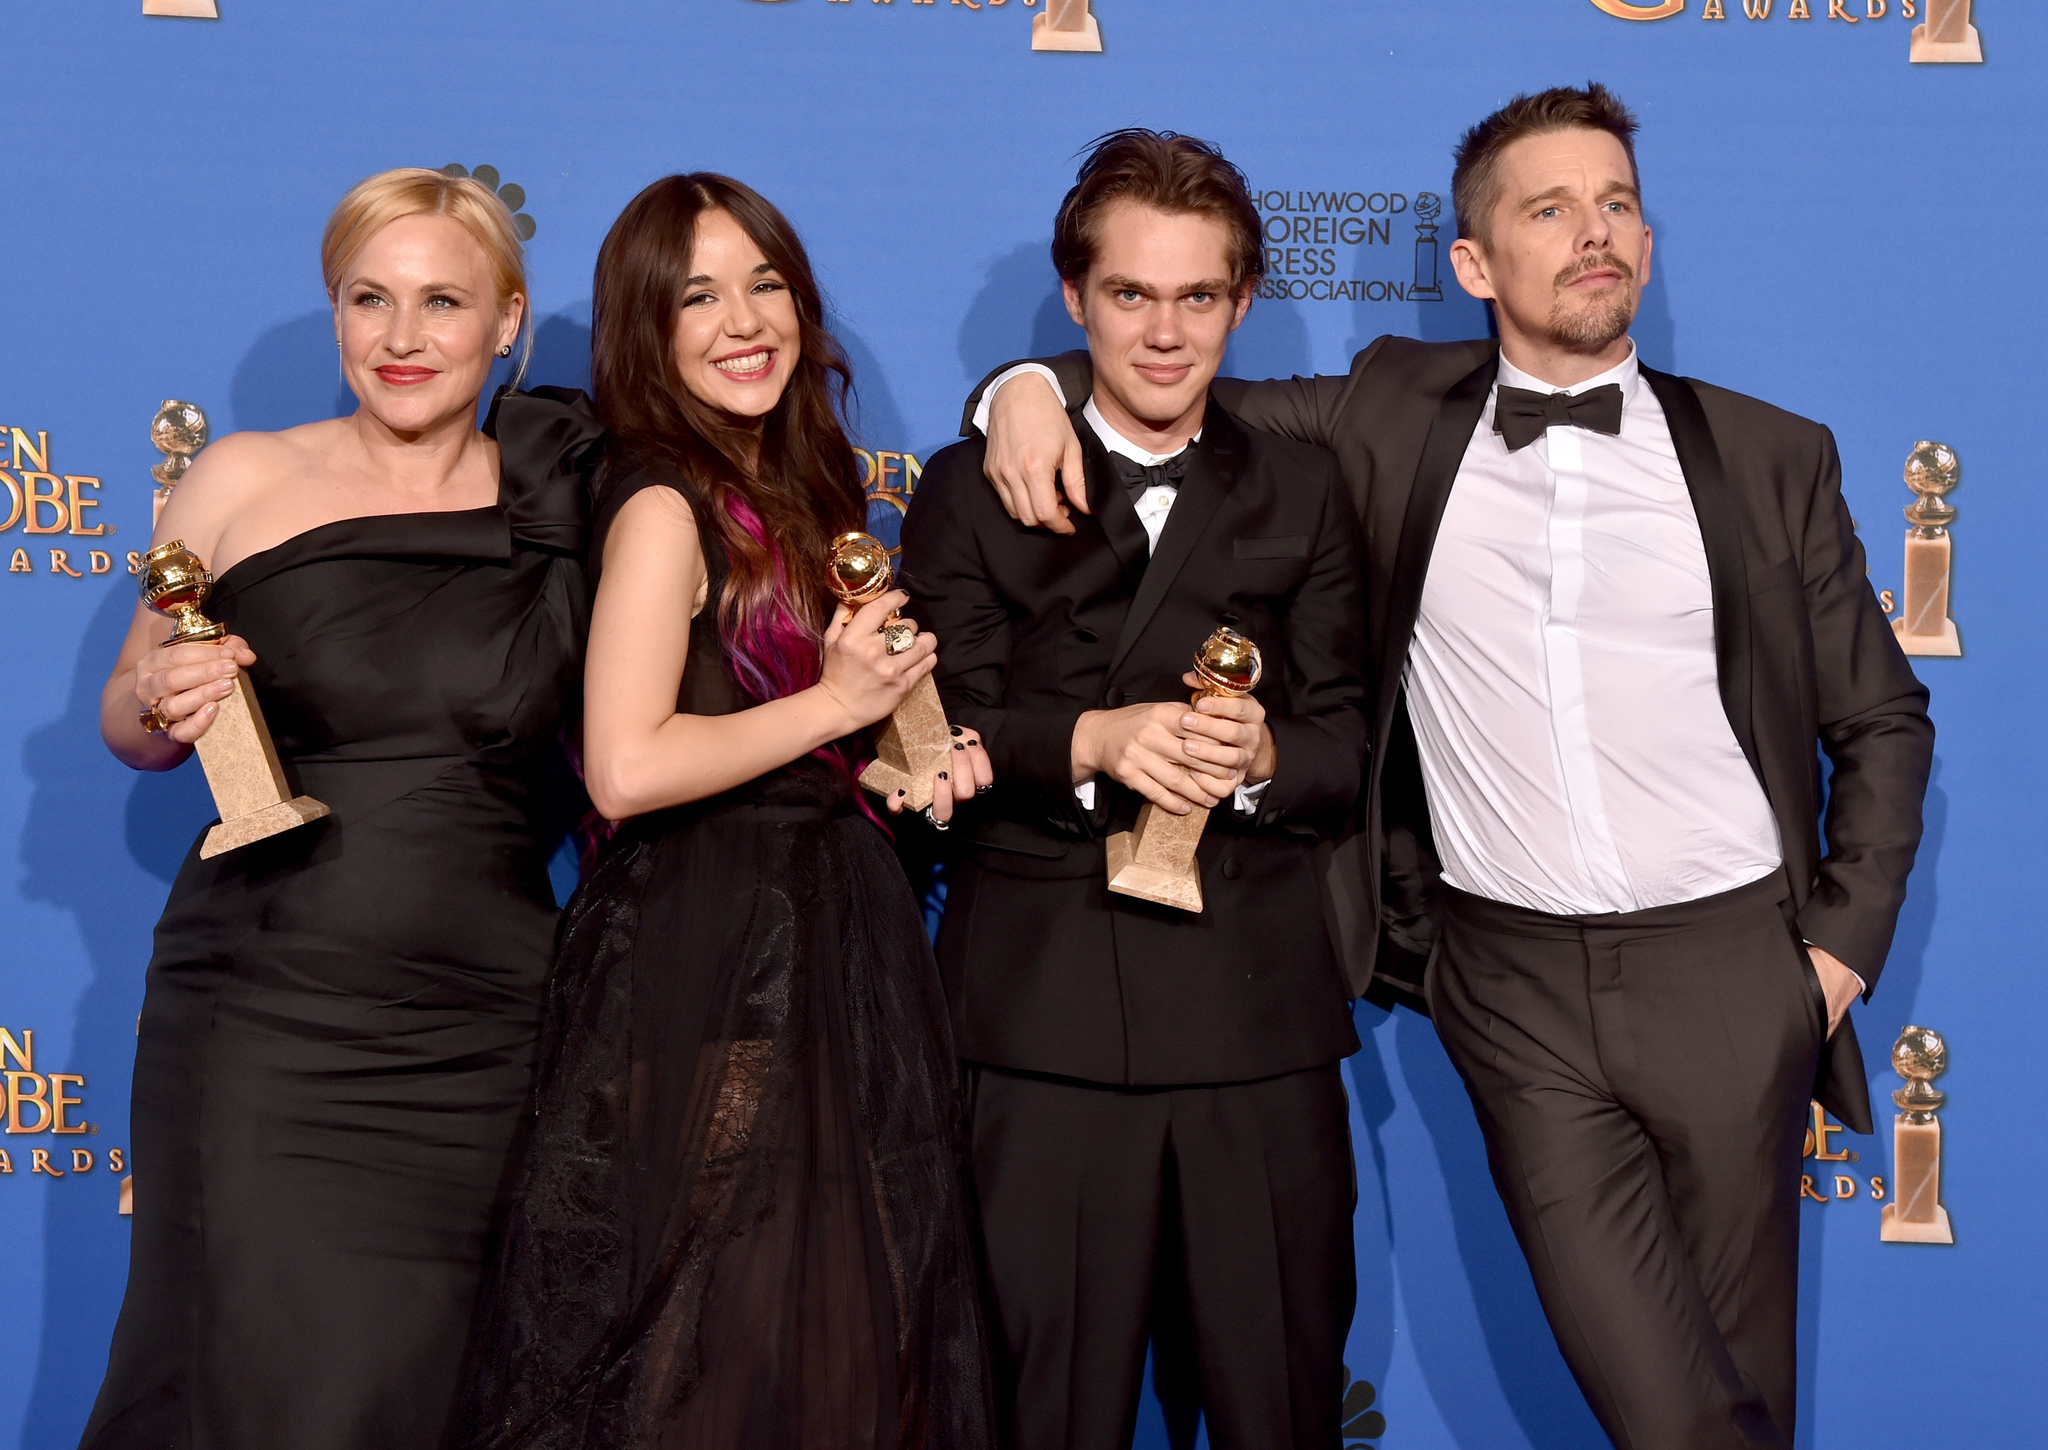 Patricia Arquette, Ethan Hawke, Lorelei Linklater and Ellar Coltrane at event of 72nd Golden Globe Awards (2015)